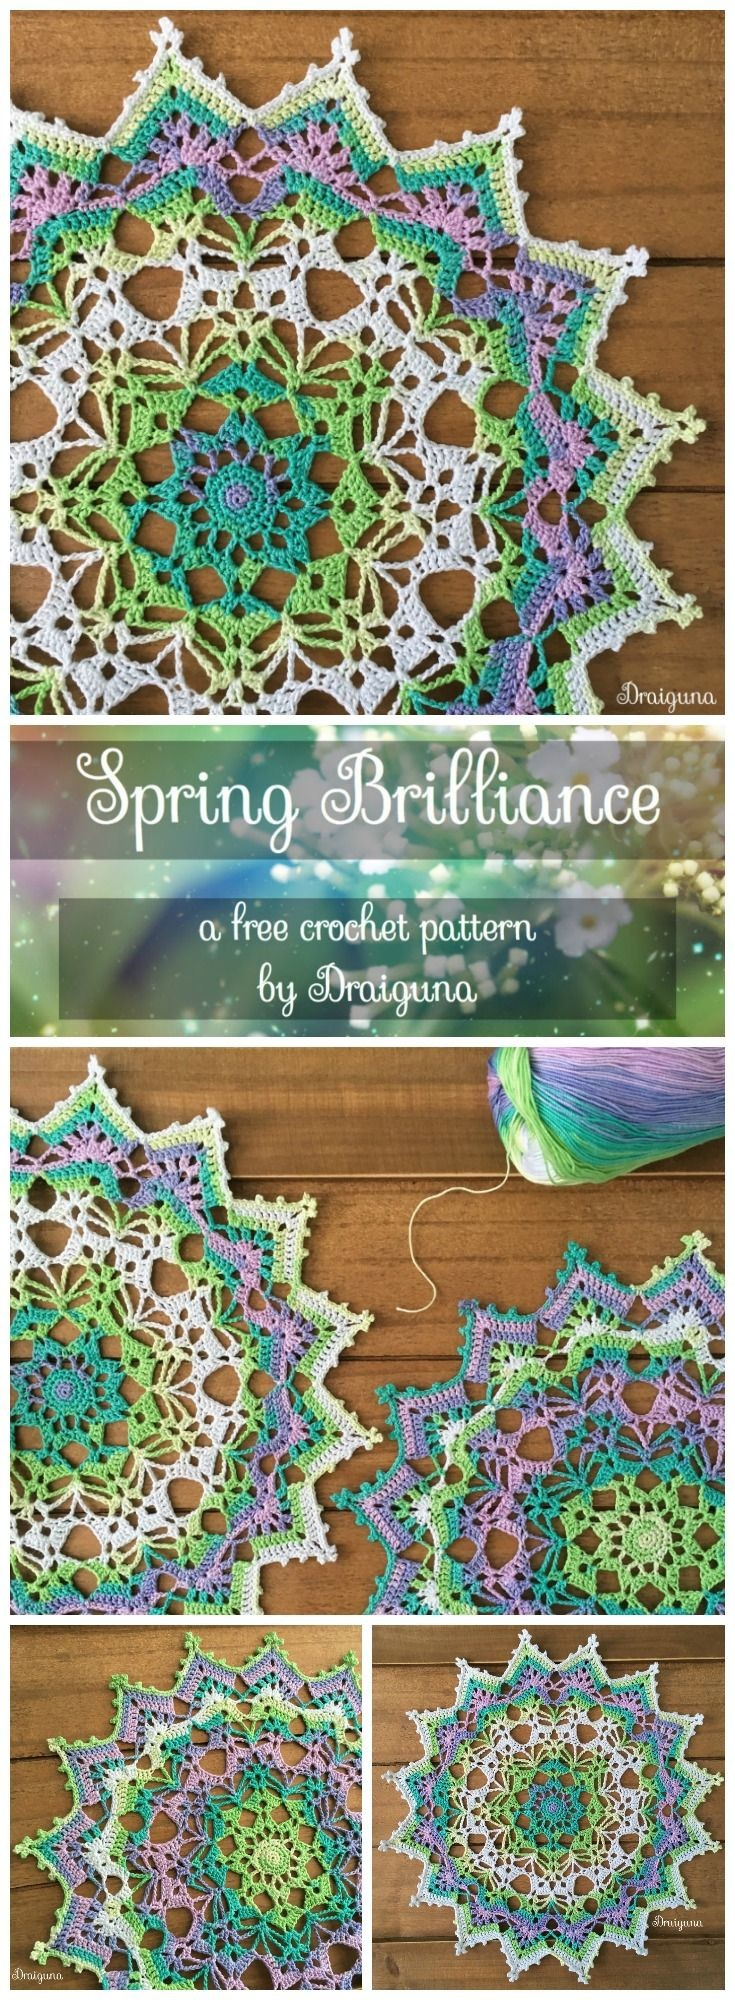 Free Crochet Doily Patterns Crochet Doily Patterns For Beginners Fresh This Free Doily Pattern